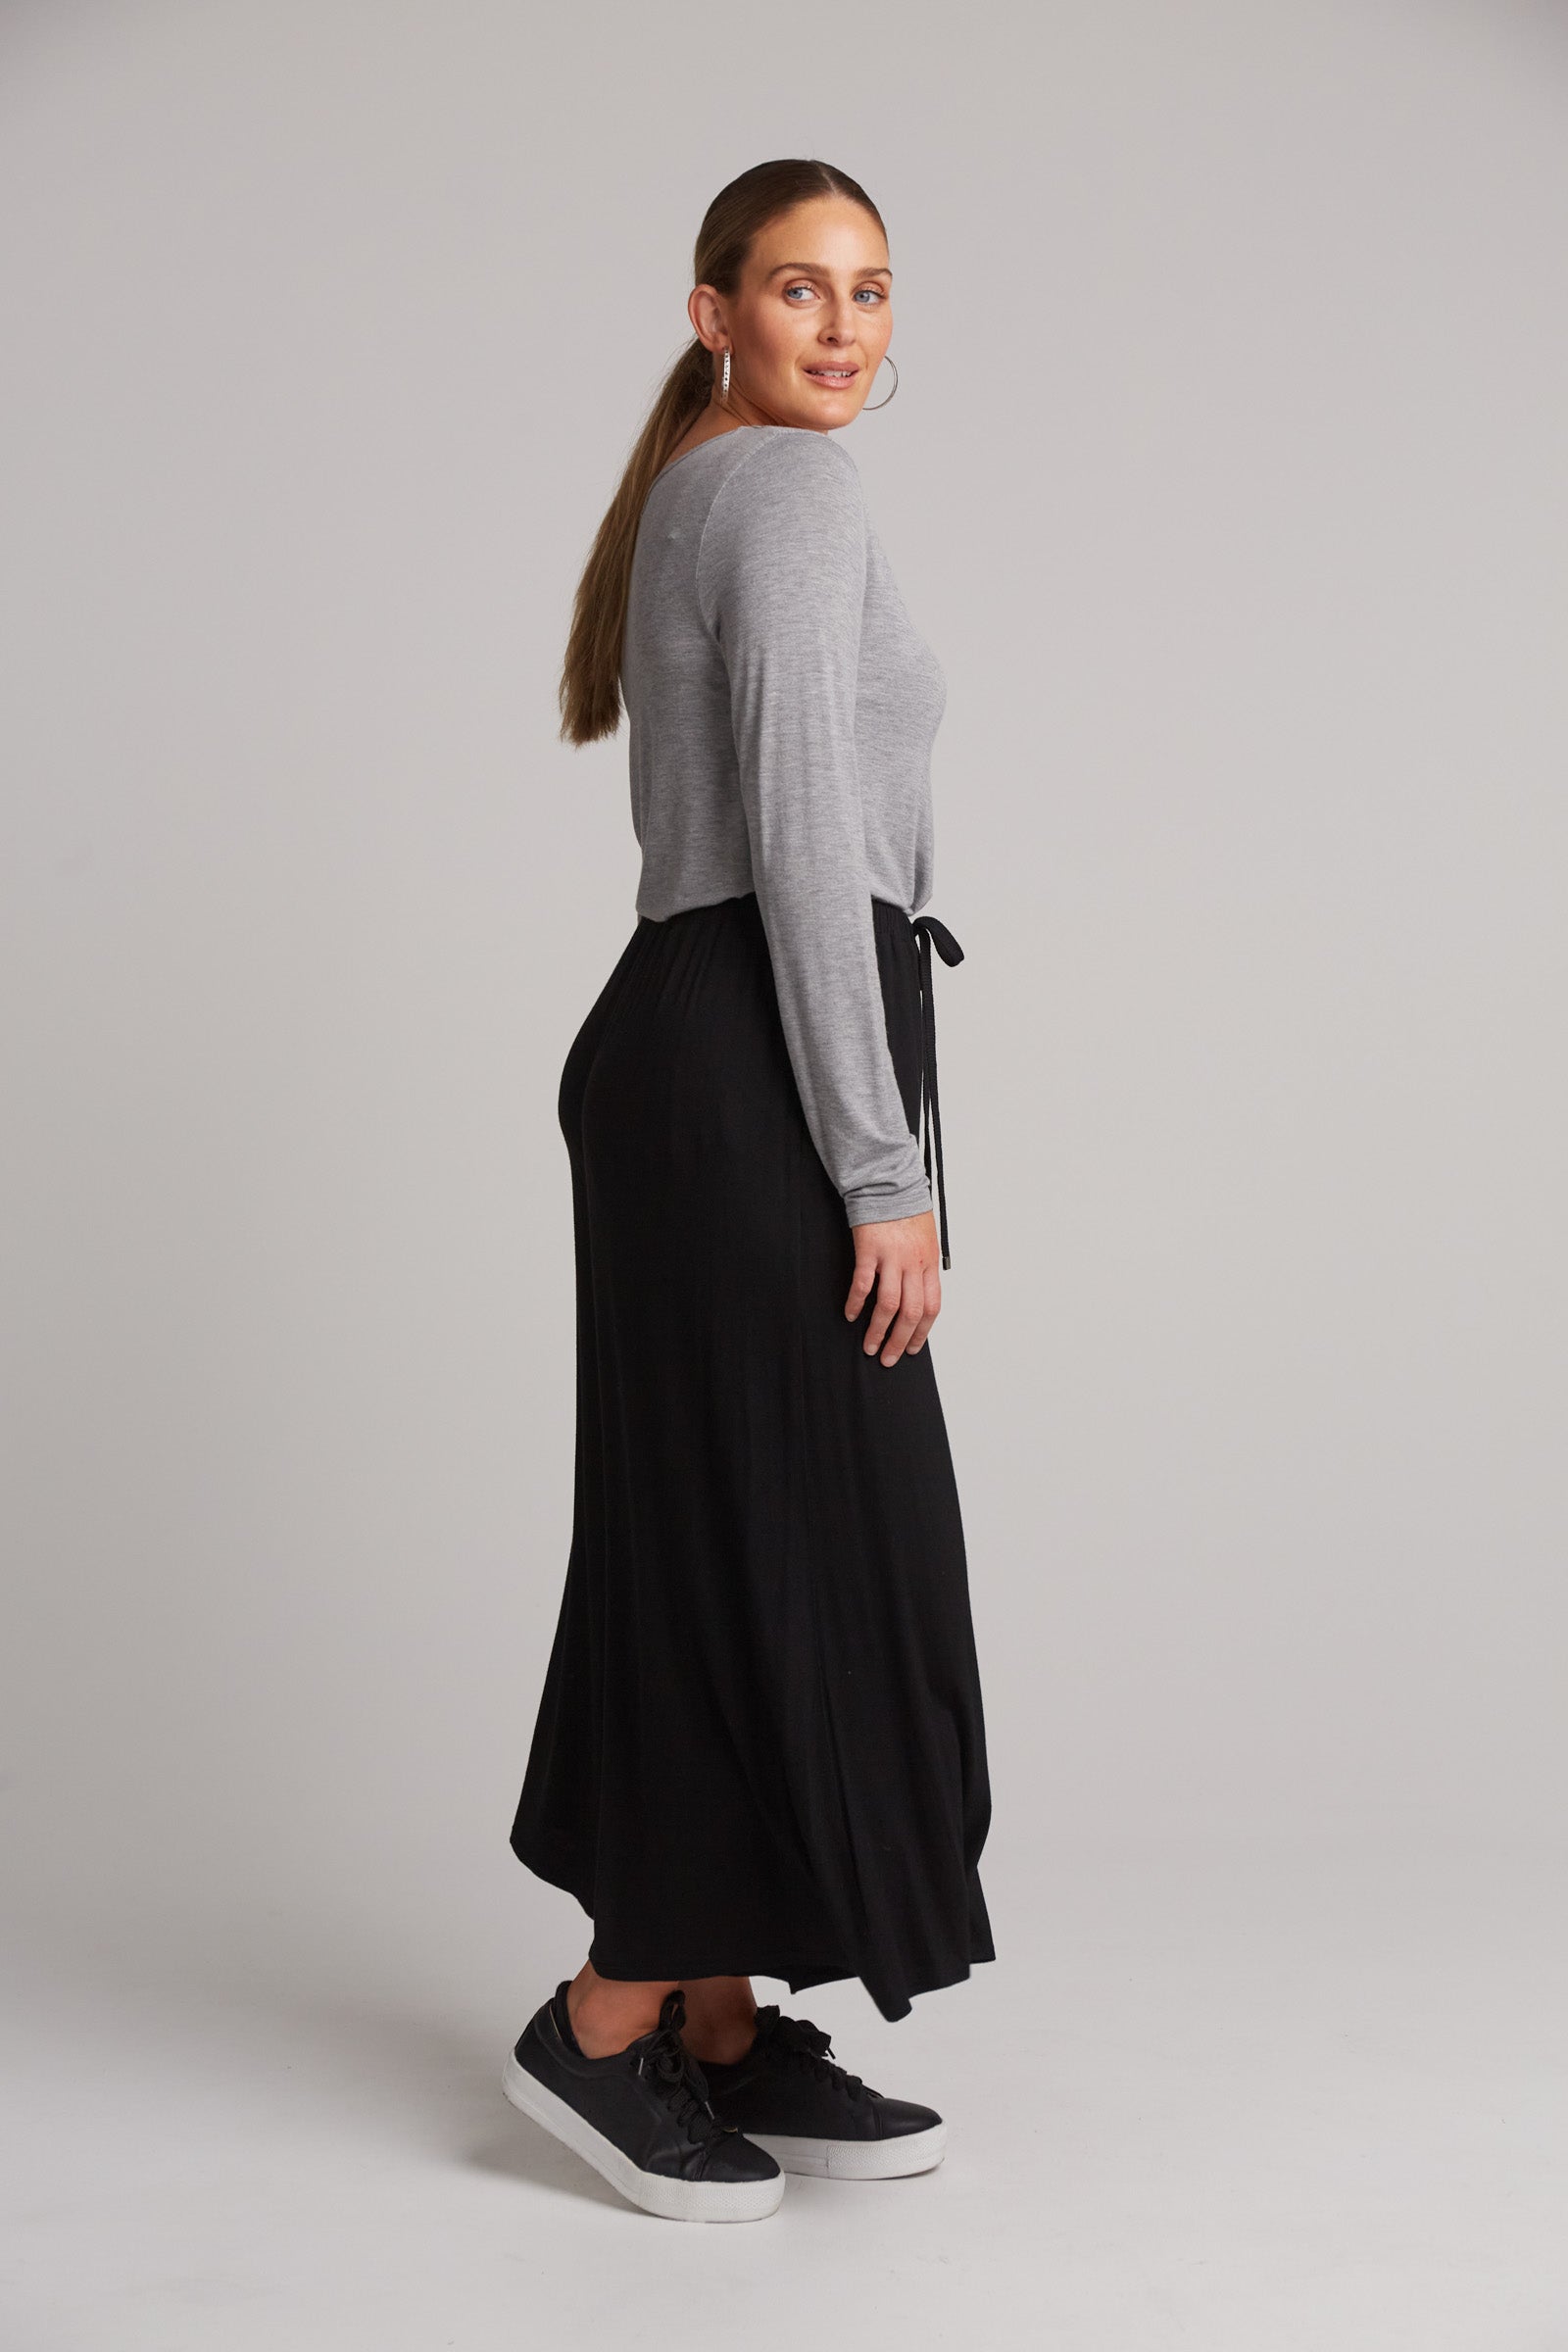 Studio Jersey Tie Pant - Ebony - eb&ive Clothing - Pant Relaxed Jersey